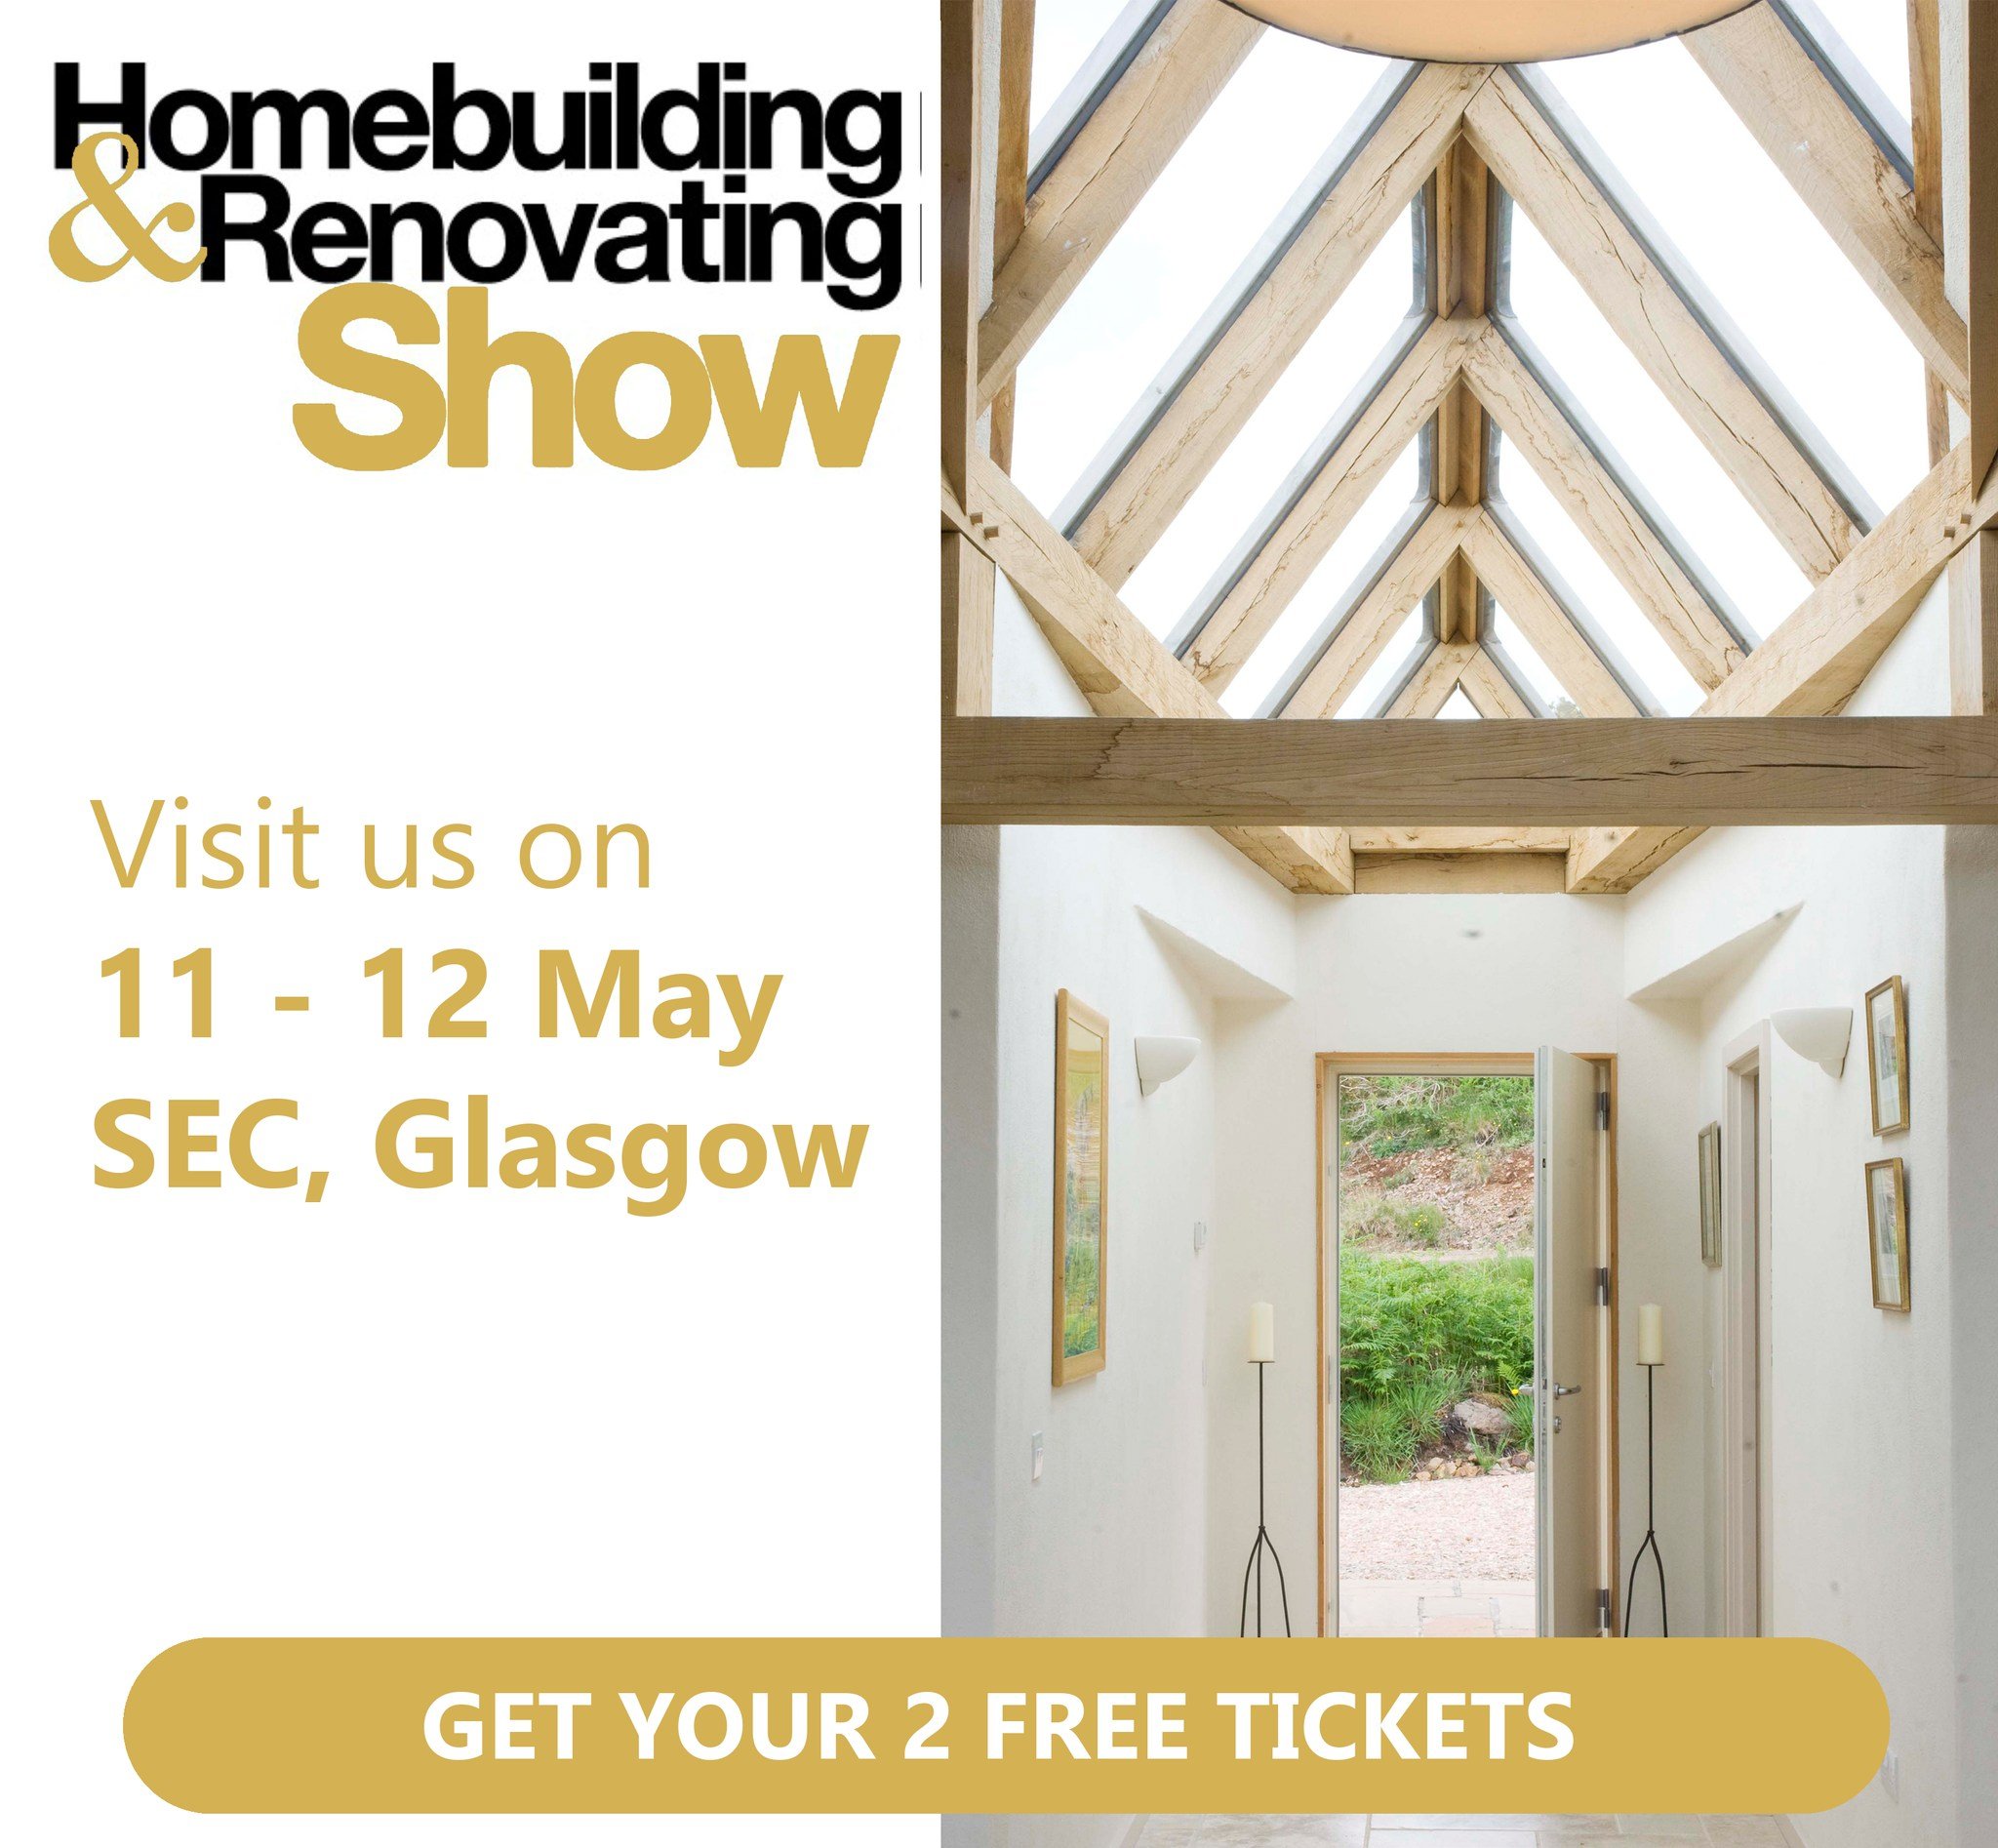 Just one more day until the @homebuildingshow  at SEC Glasgow, come along and meet us on Stand D118 to discuss your self build project. Click the link in our bio for two free tickets